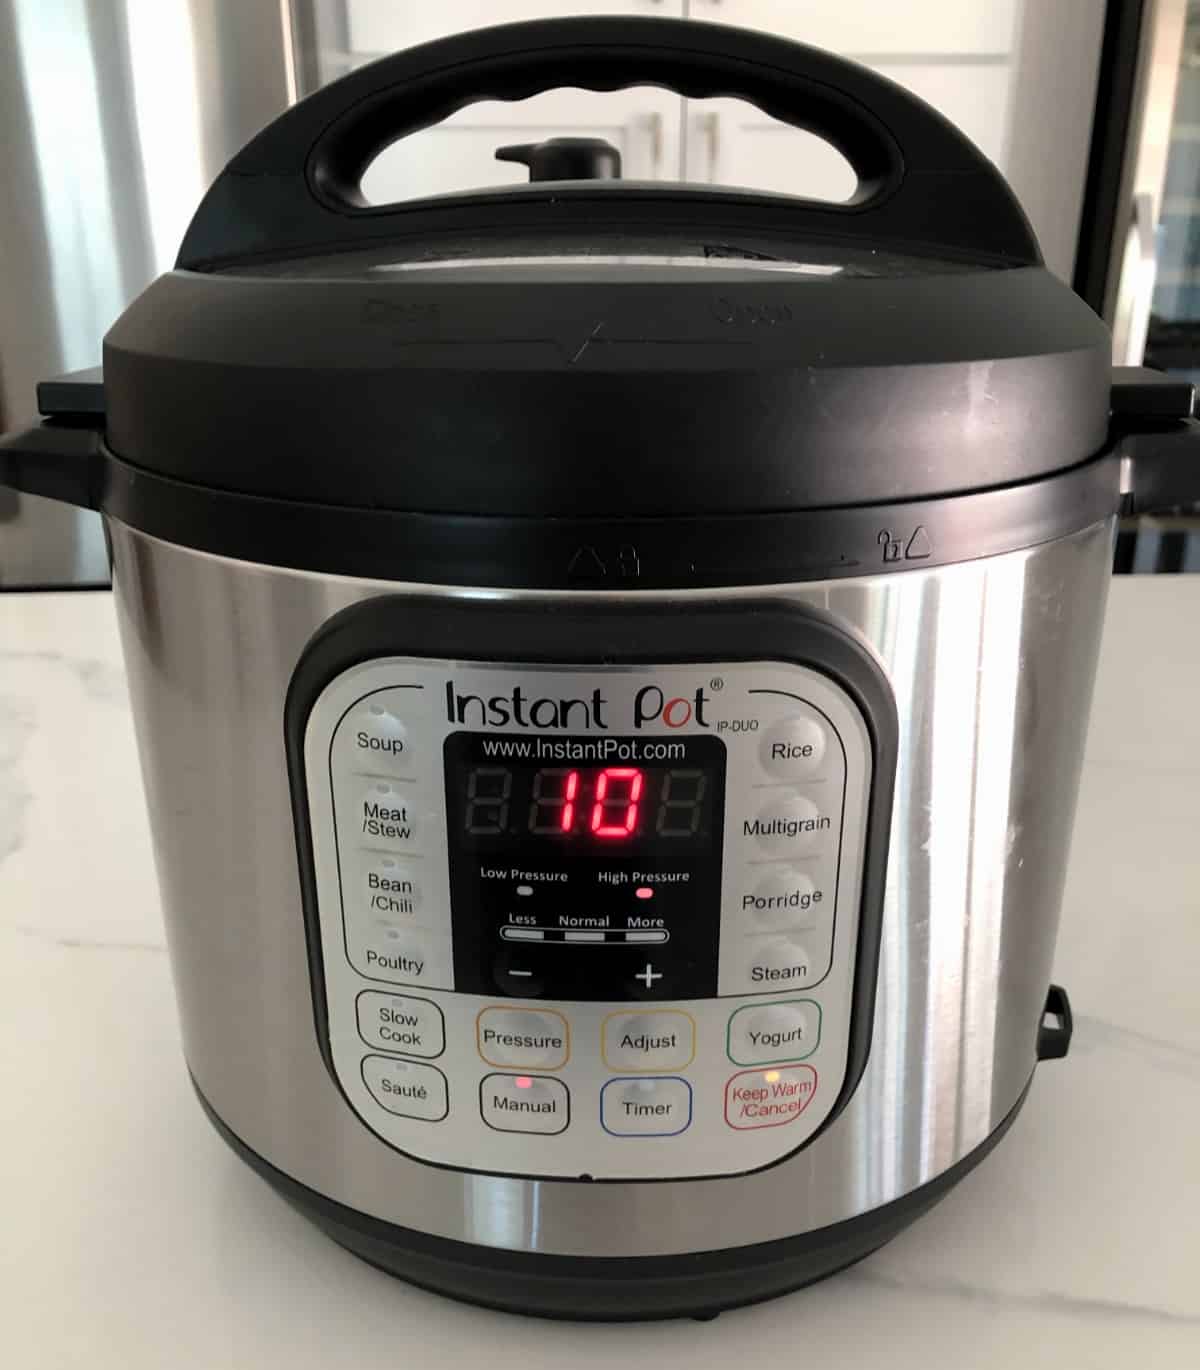 InstantPot showing 10 minutes on High pressure.